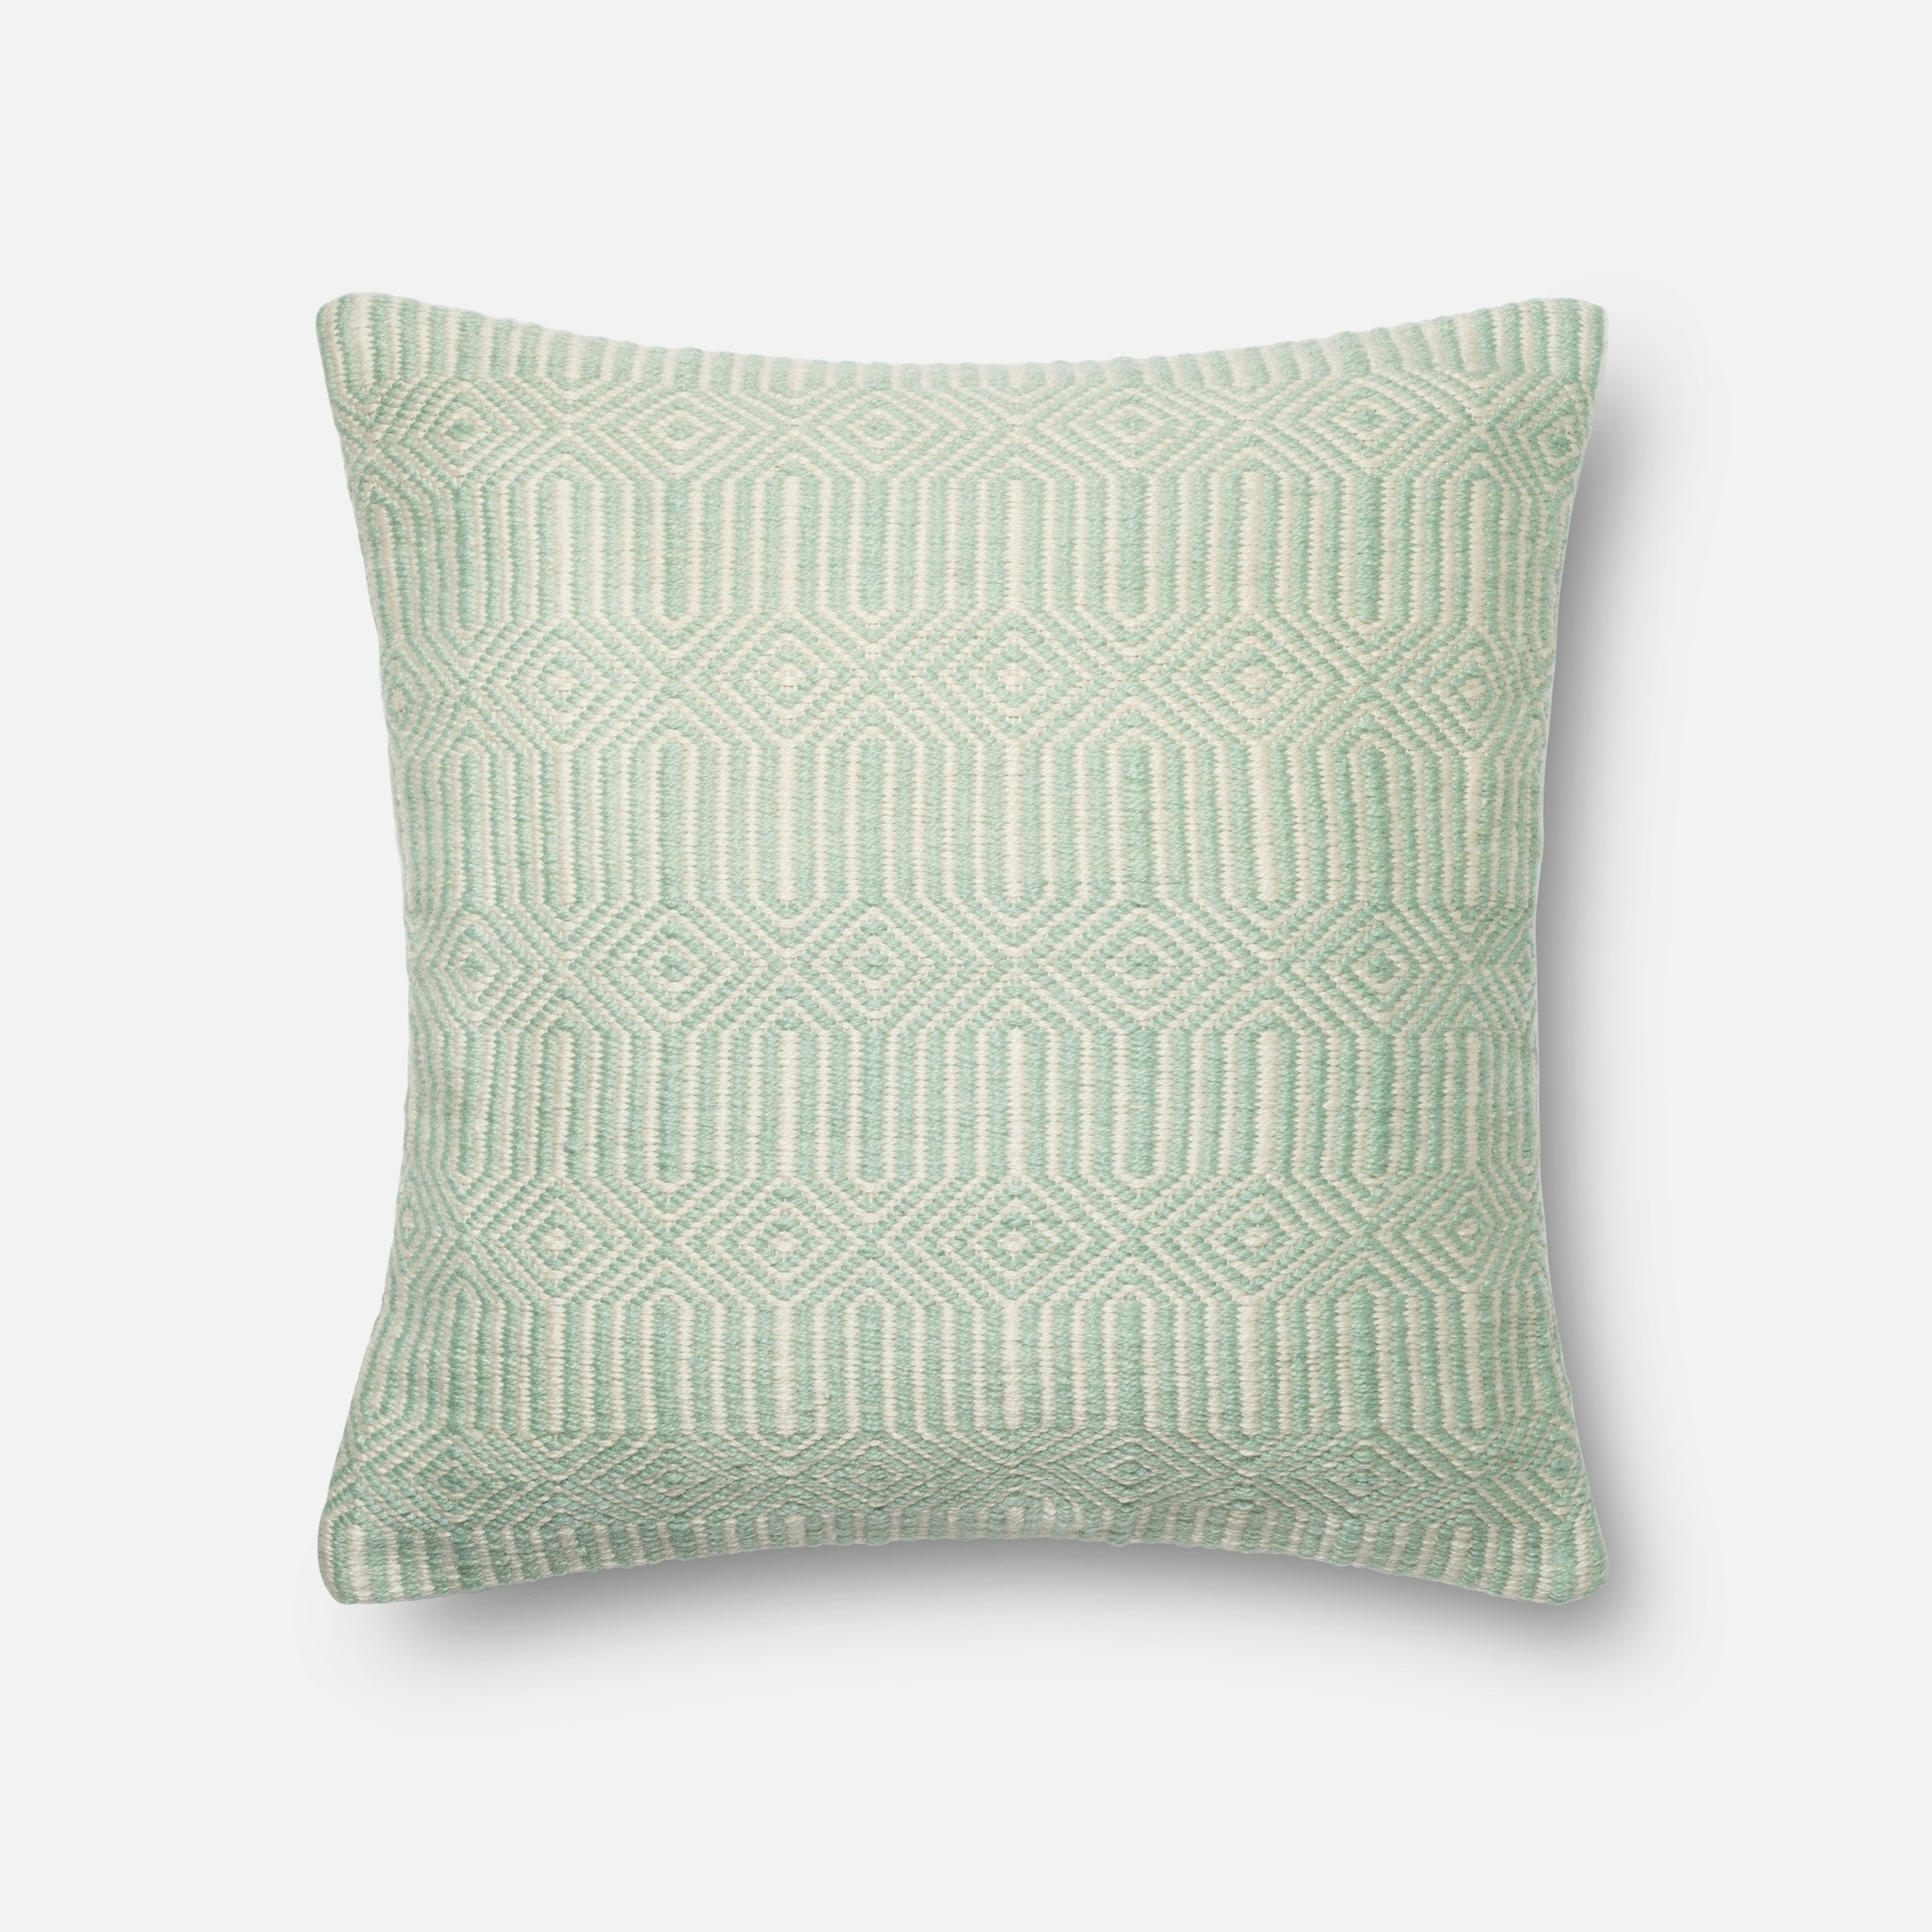 PILLOWS - AQUA / IVORY - 22" X 22" Cover Only - Image 0